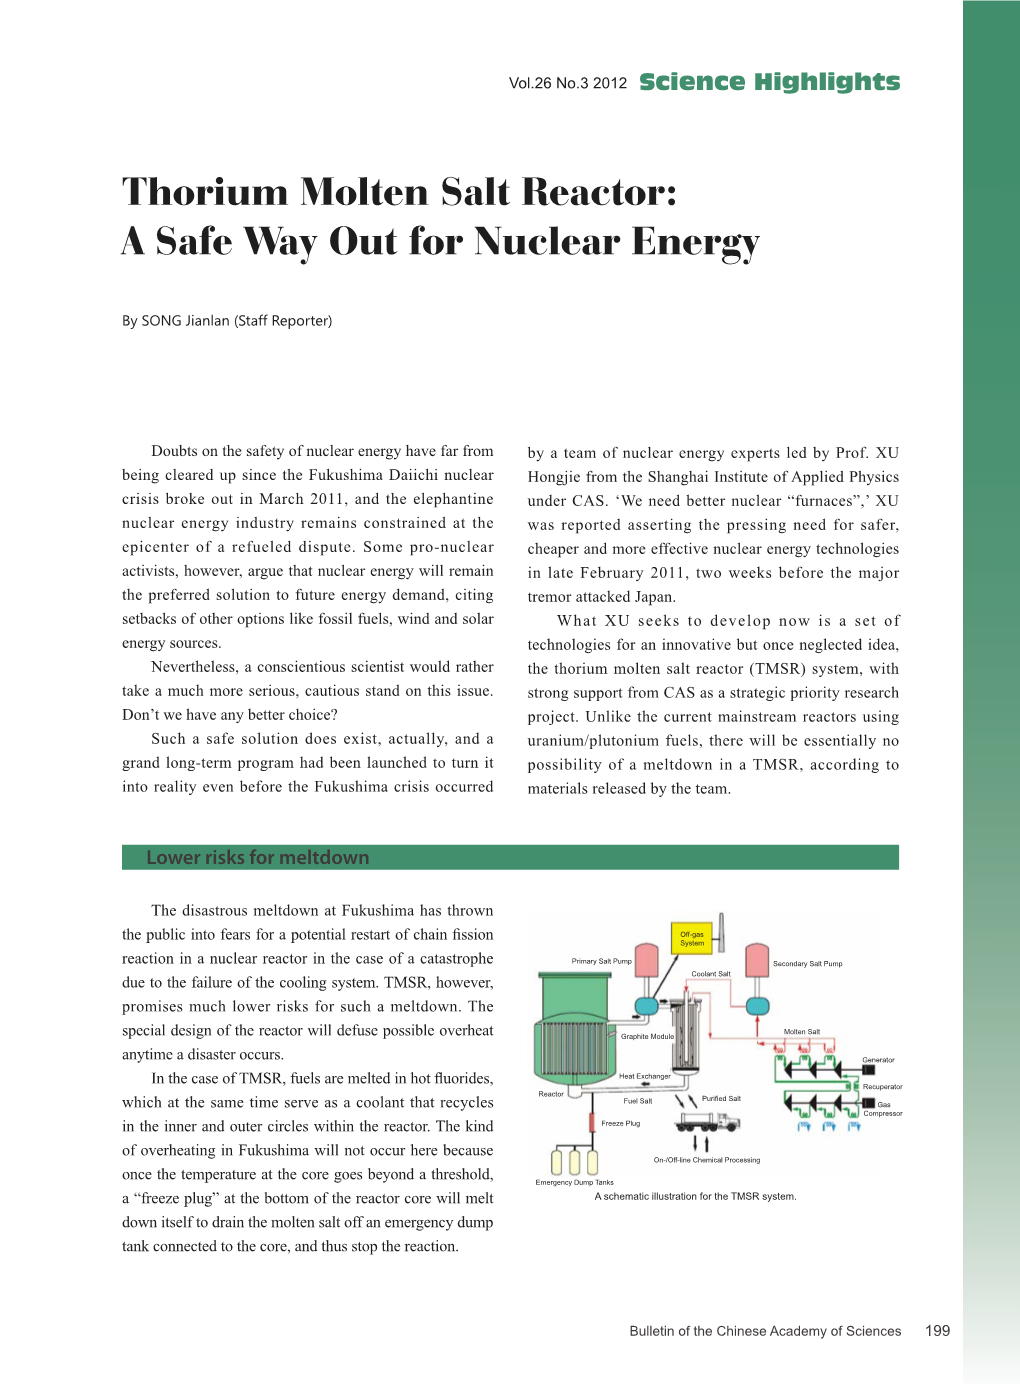 Thorium Molten Salt Reactor: a Safe Way out for Nuclear Energy